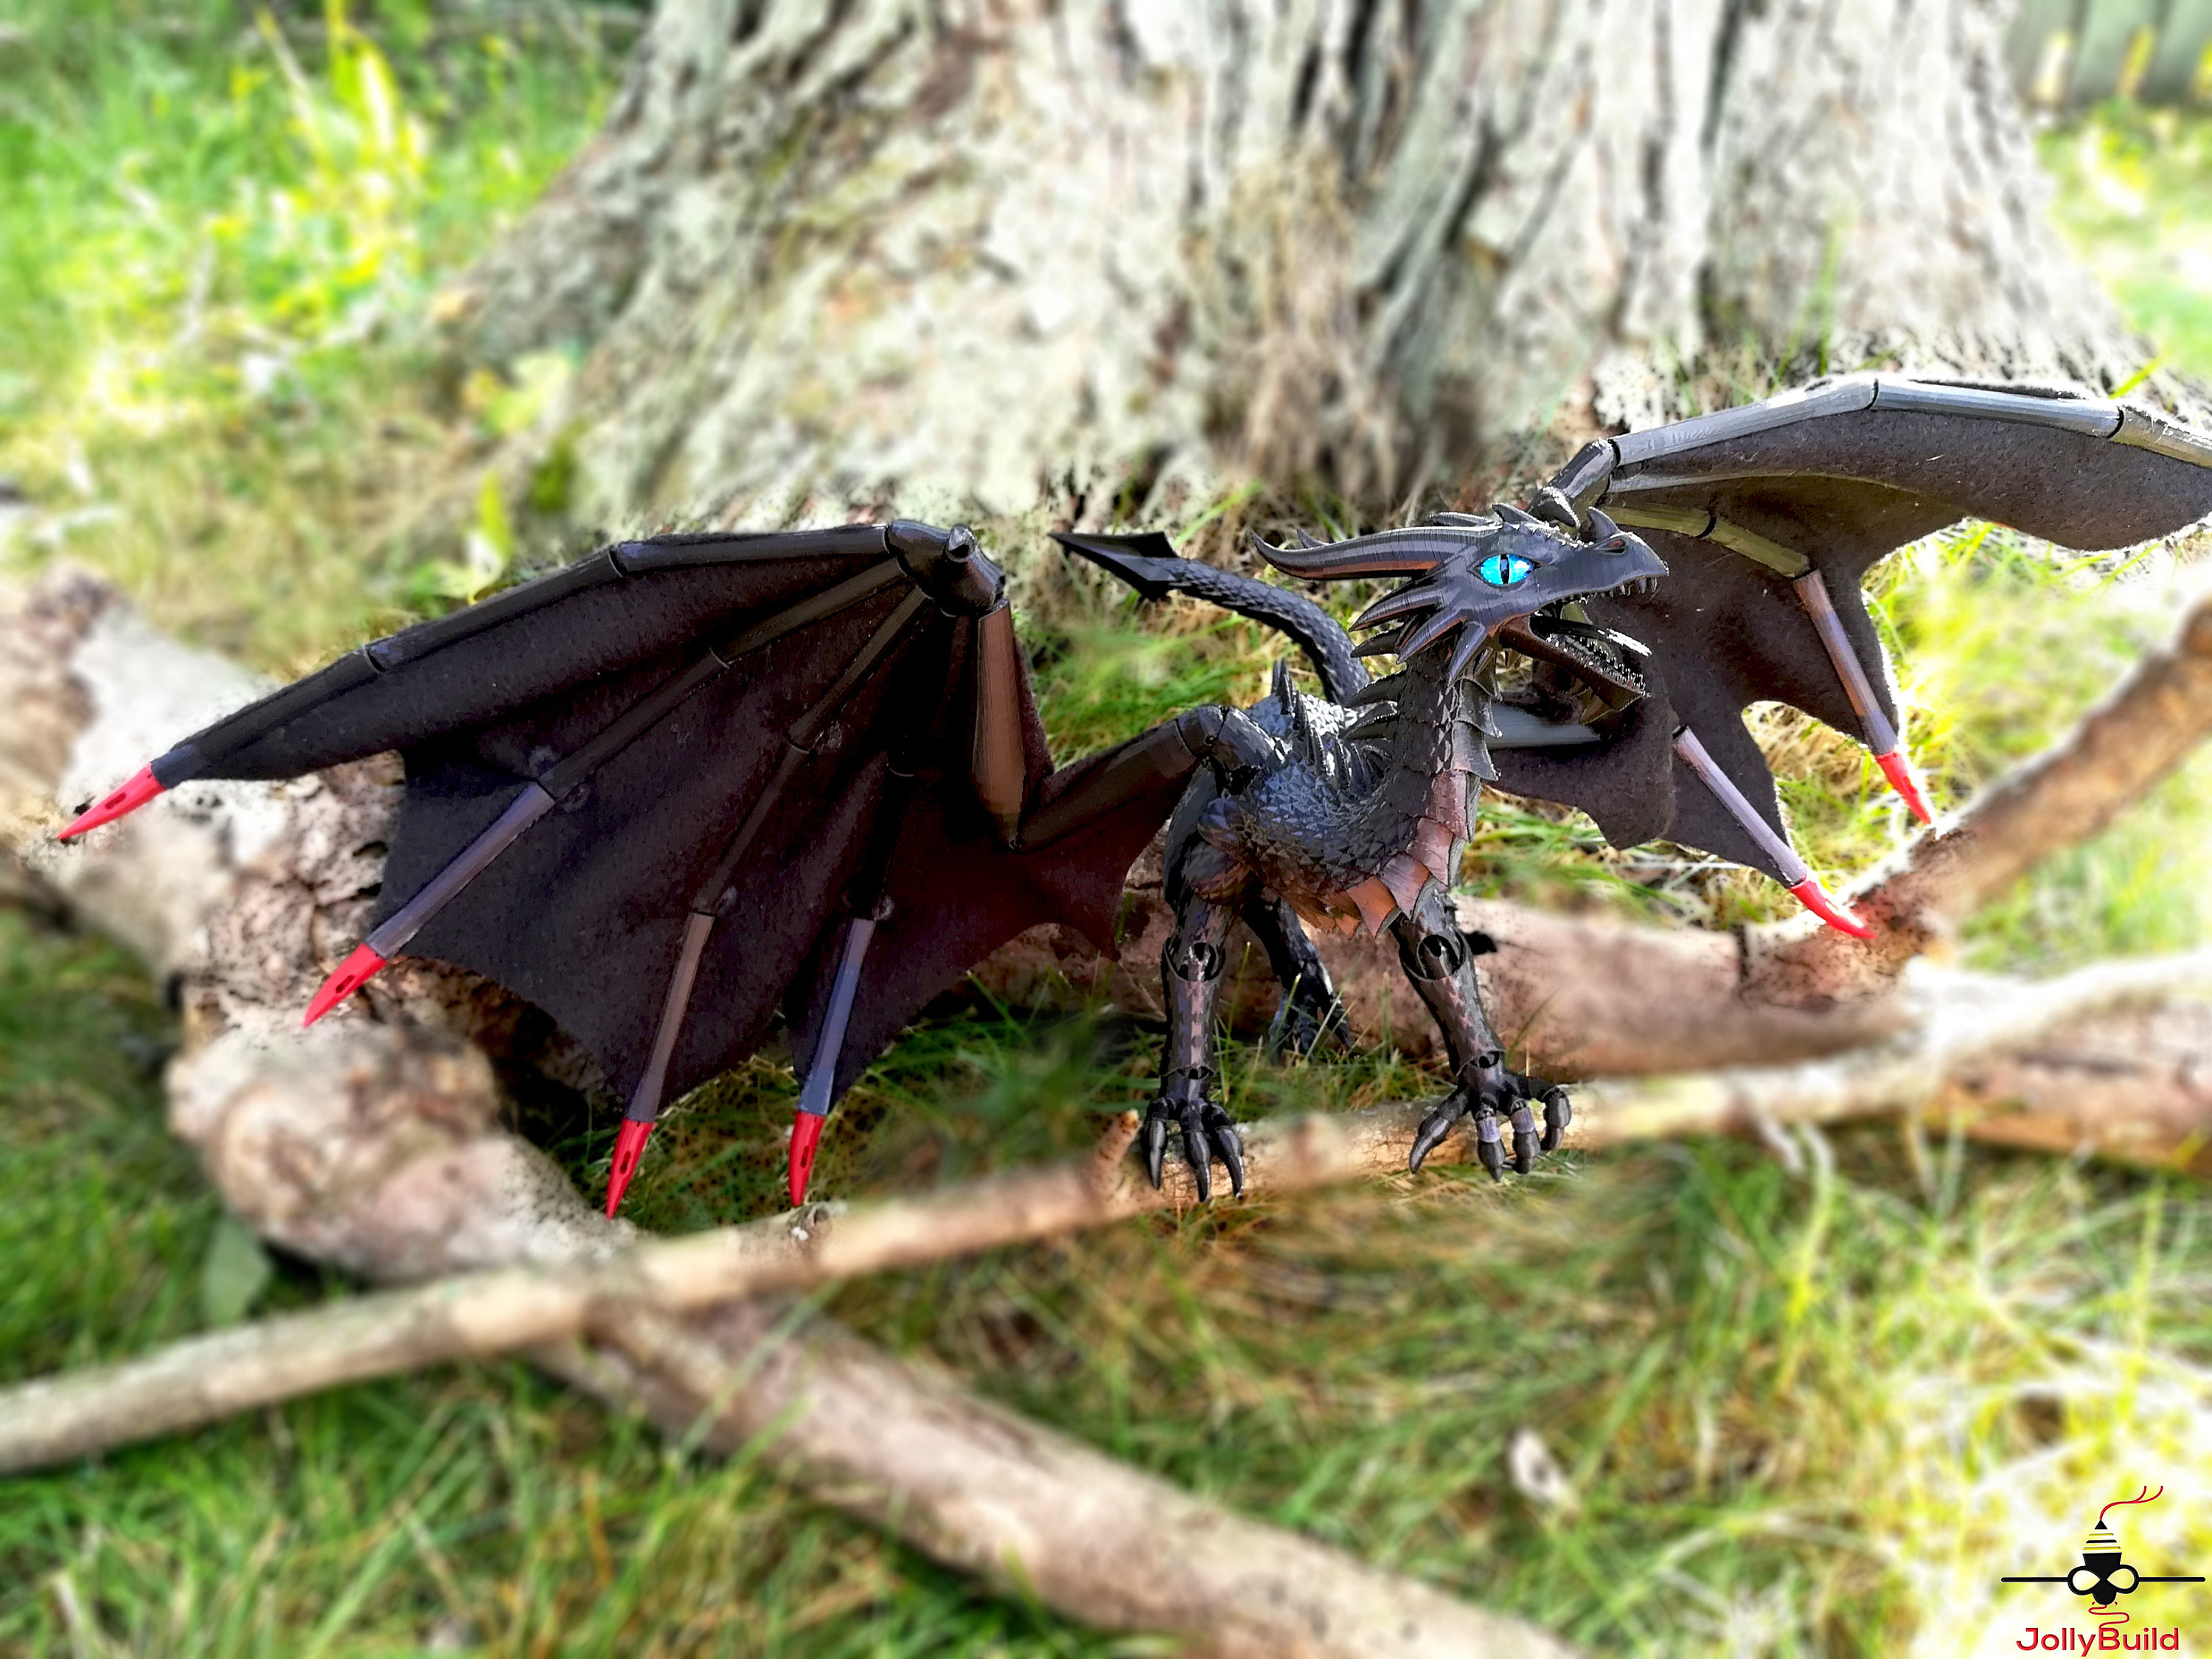 ball jointed dragon doll